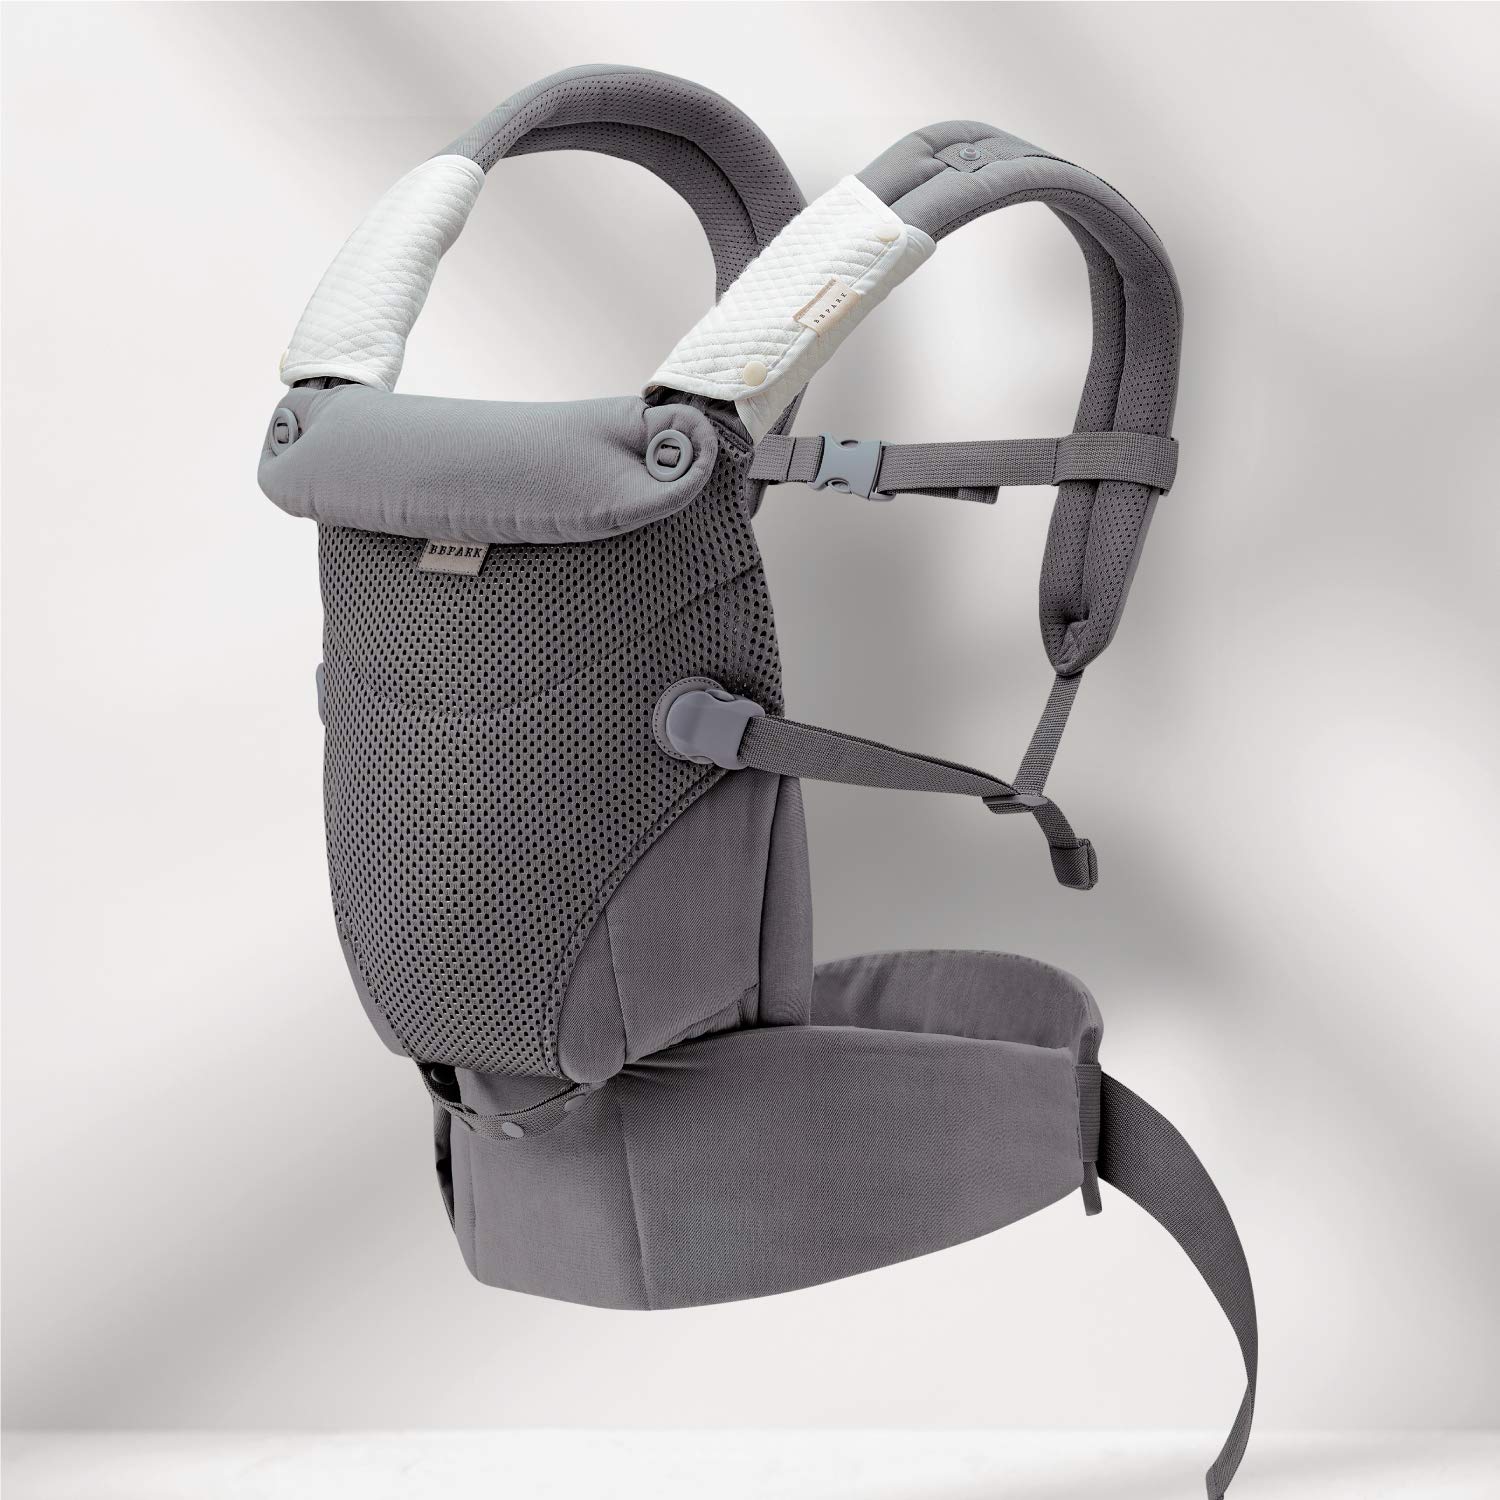 Bbpark Mesh Baby Carrier Newborn to Toddler, Facing-in and Facing-Out Front and Back Holder Kangaroo Carrier for Infant Grey